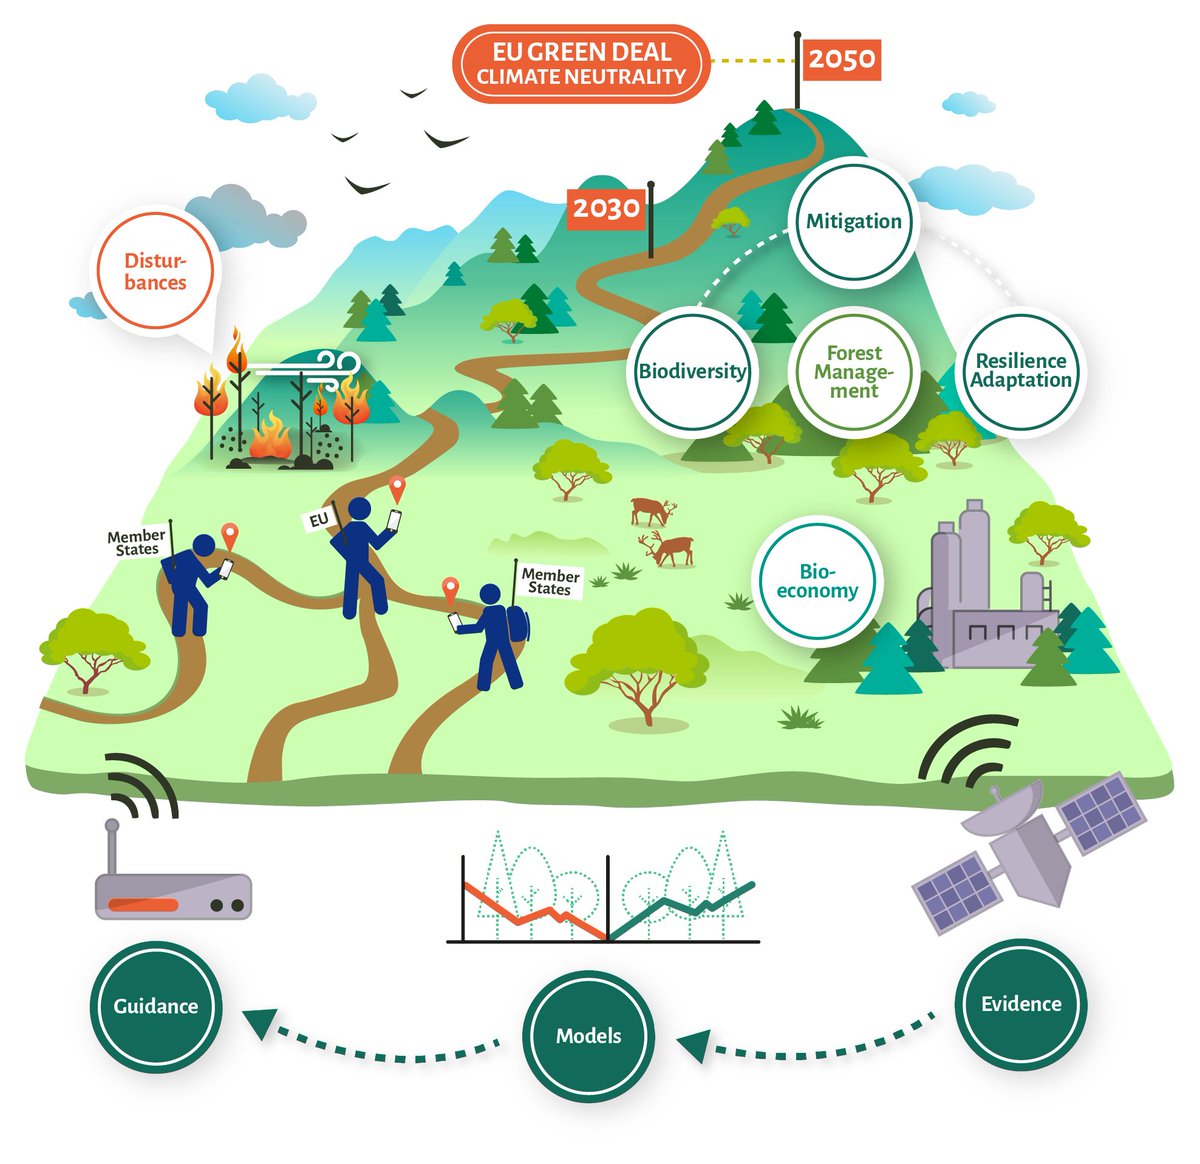 📢 #ForestNavigator recently published reports on:

🌲 An advanced #biodiversitymodelling workflow
🌲 A collection of #socioeconomicindicators for recreational and cultural services
🌲 #Marketscenarios for selected material uses of #wood and #bioenergy

forestnavigator.eu/news/forestnav…